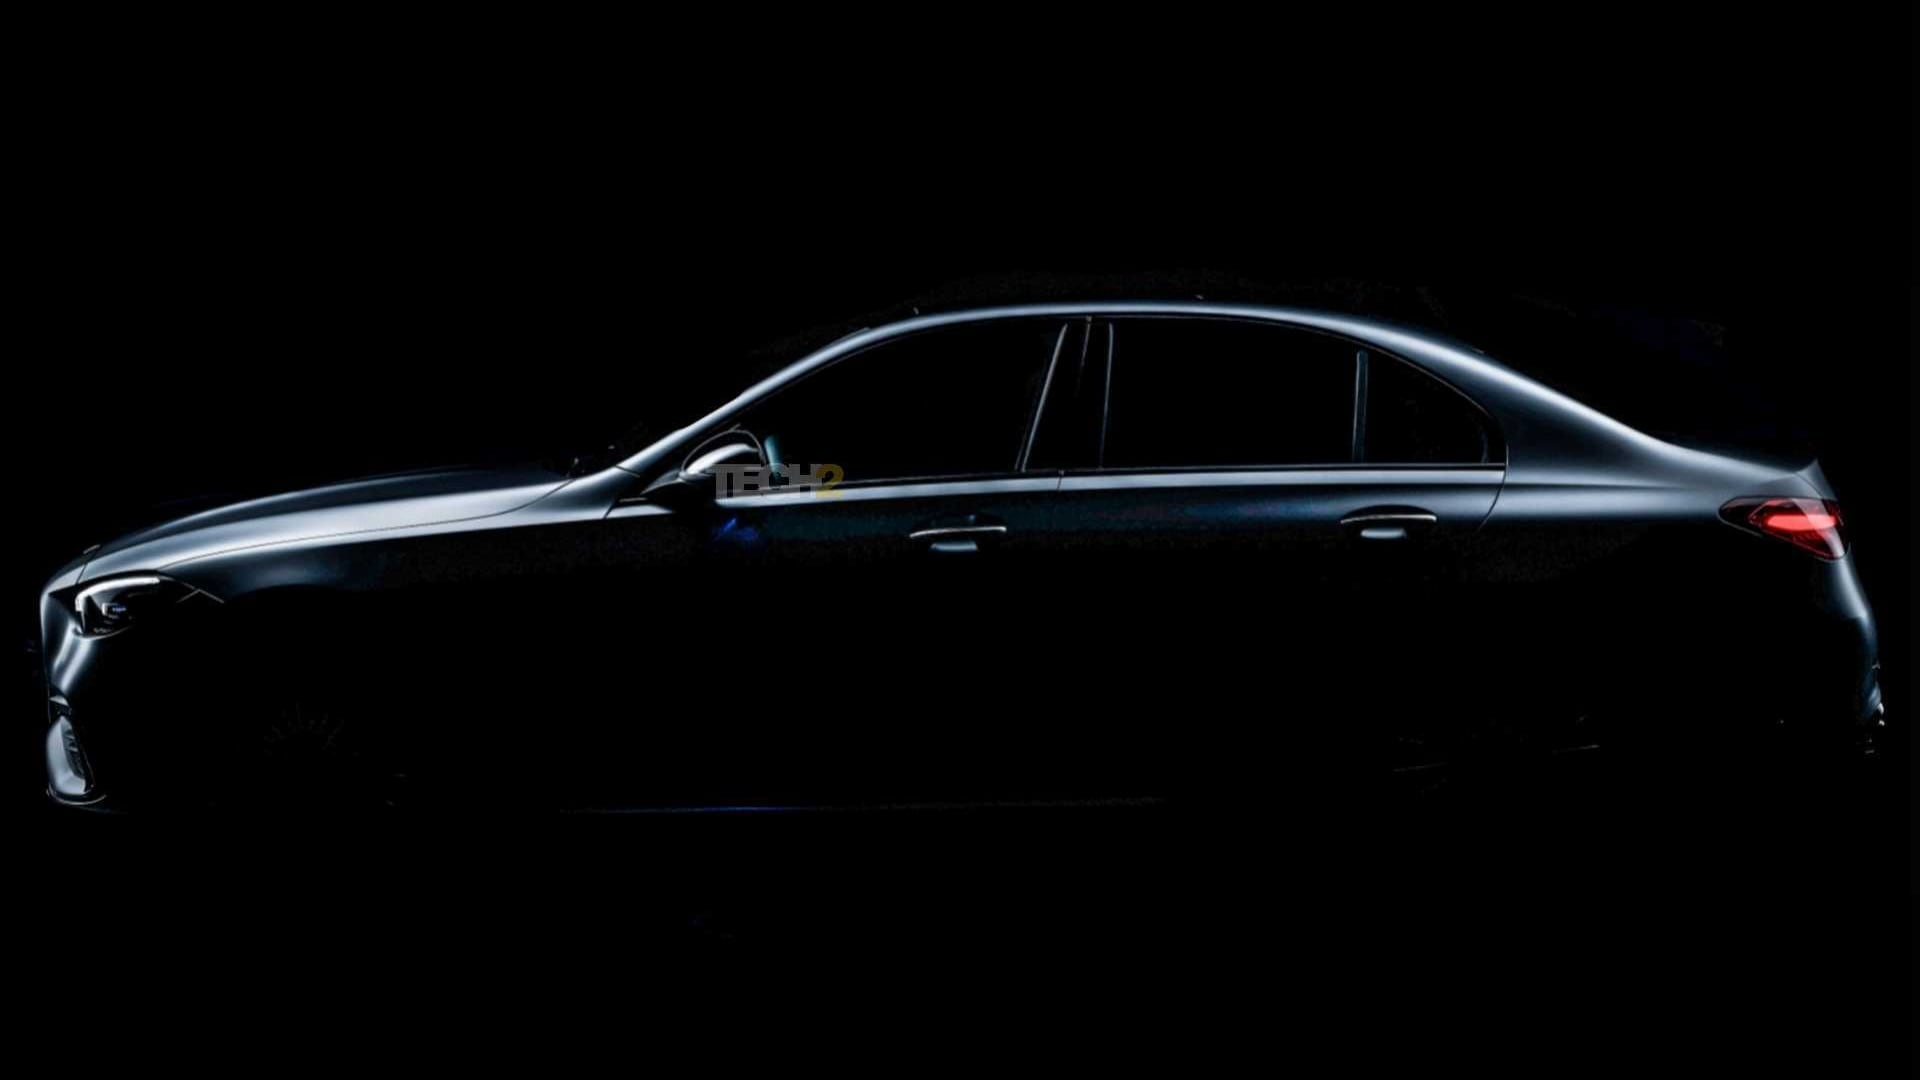  Fifth-generation Mercedes-Benz C-Class to make its global debut on 23 February